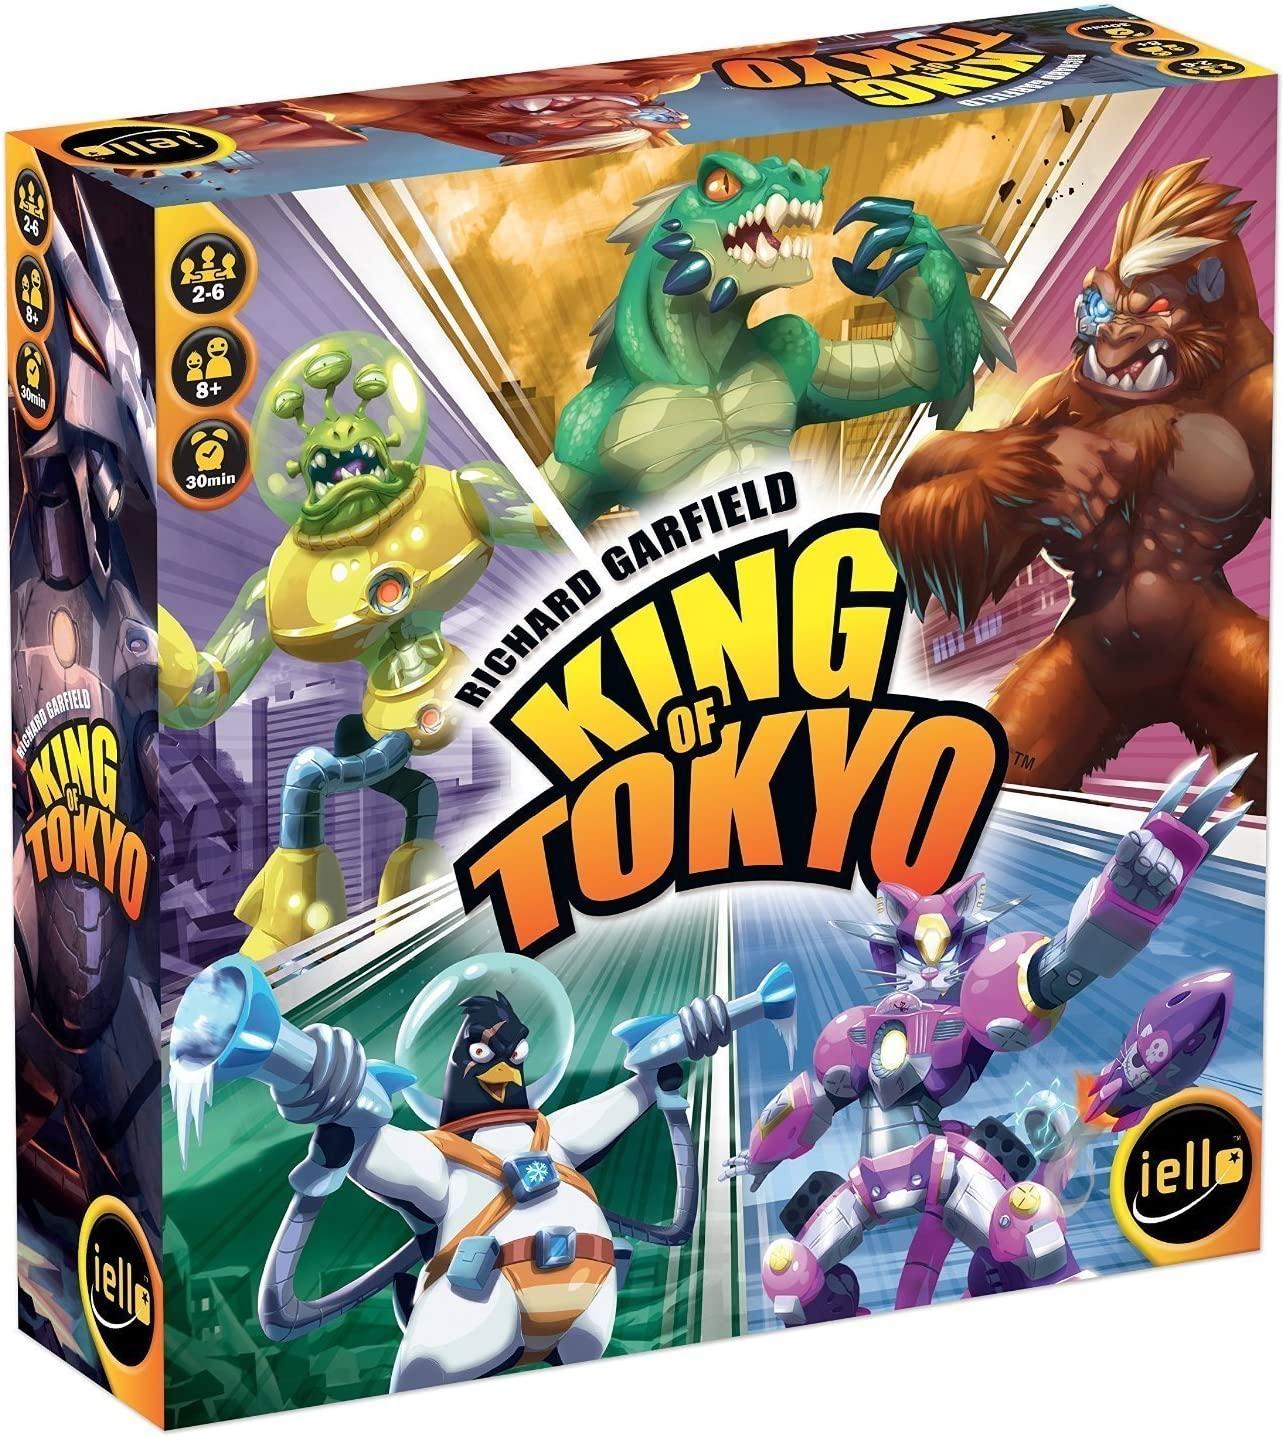 1 game (6 cardboard figures, 6 monster boards, 1 Tokyo board, 6 black dice, 2 green dice, 66 power cards, 50 energy cubes, 28 tokens) : carboard, plastic ; in box 26 x 26 x 8 cm + 1 rule book (7 pages : colo illustrations ; 22 cm.)